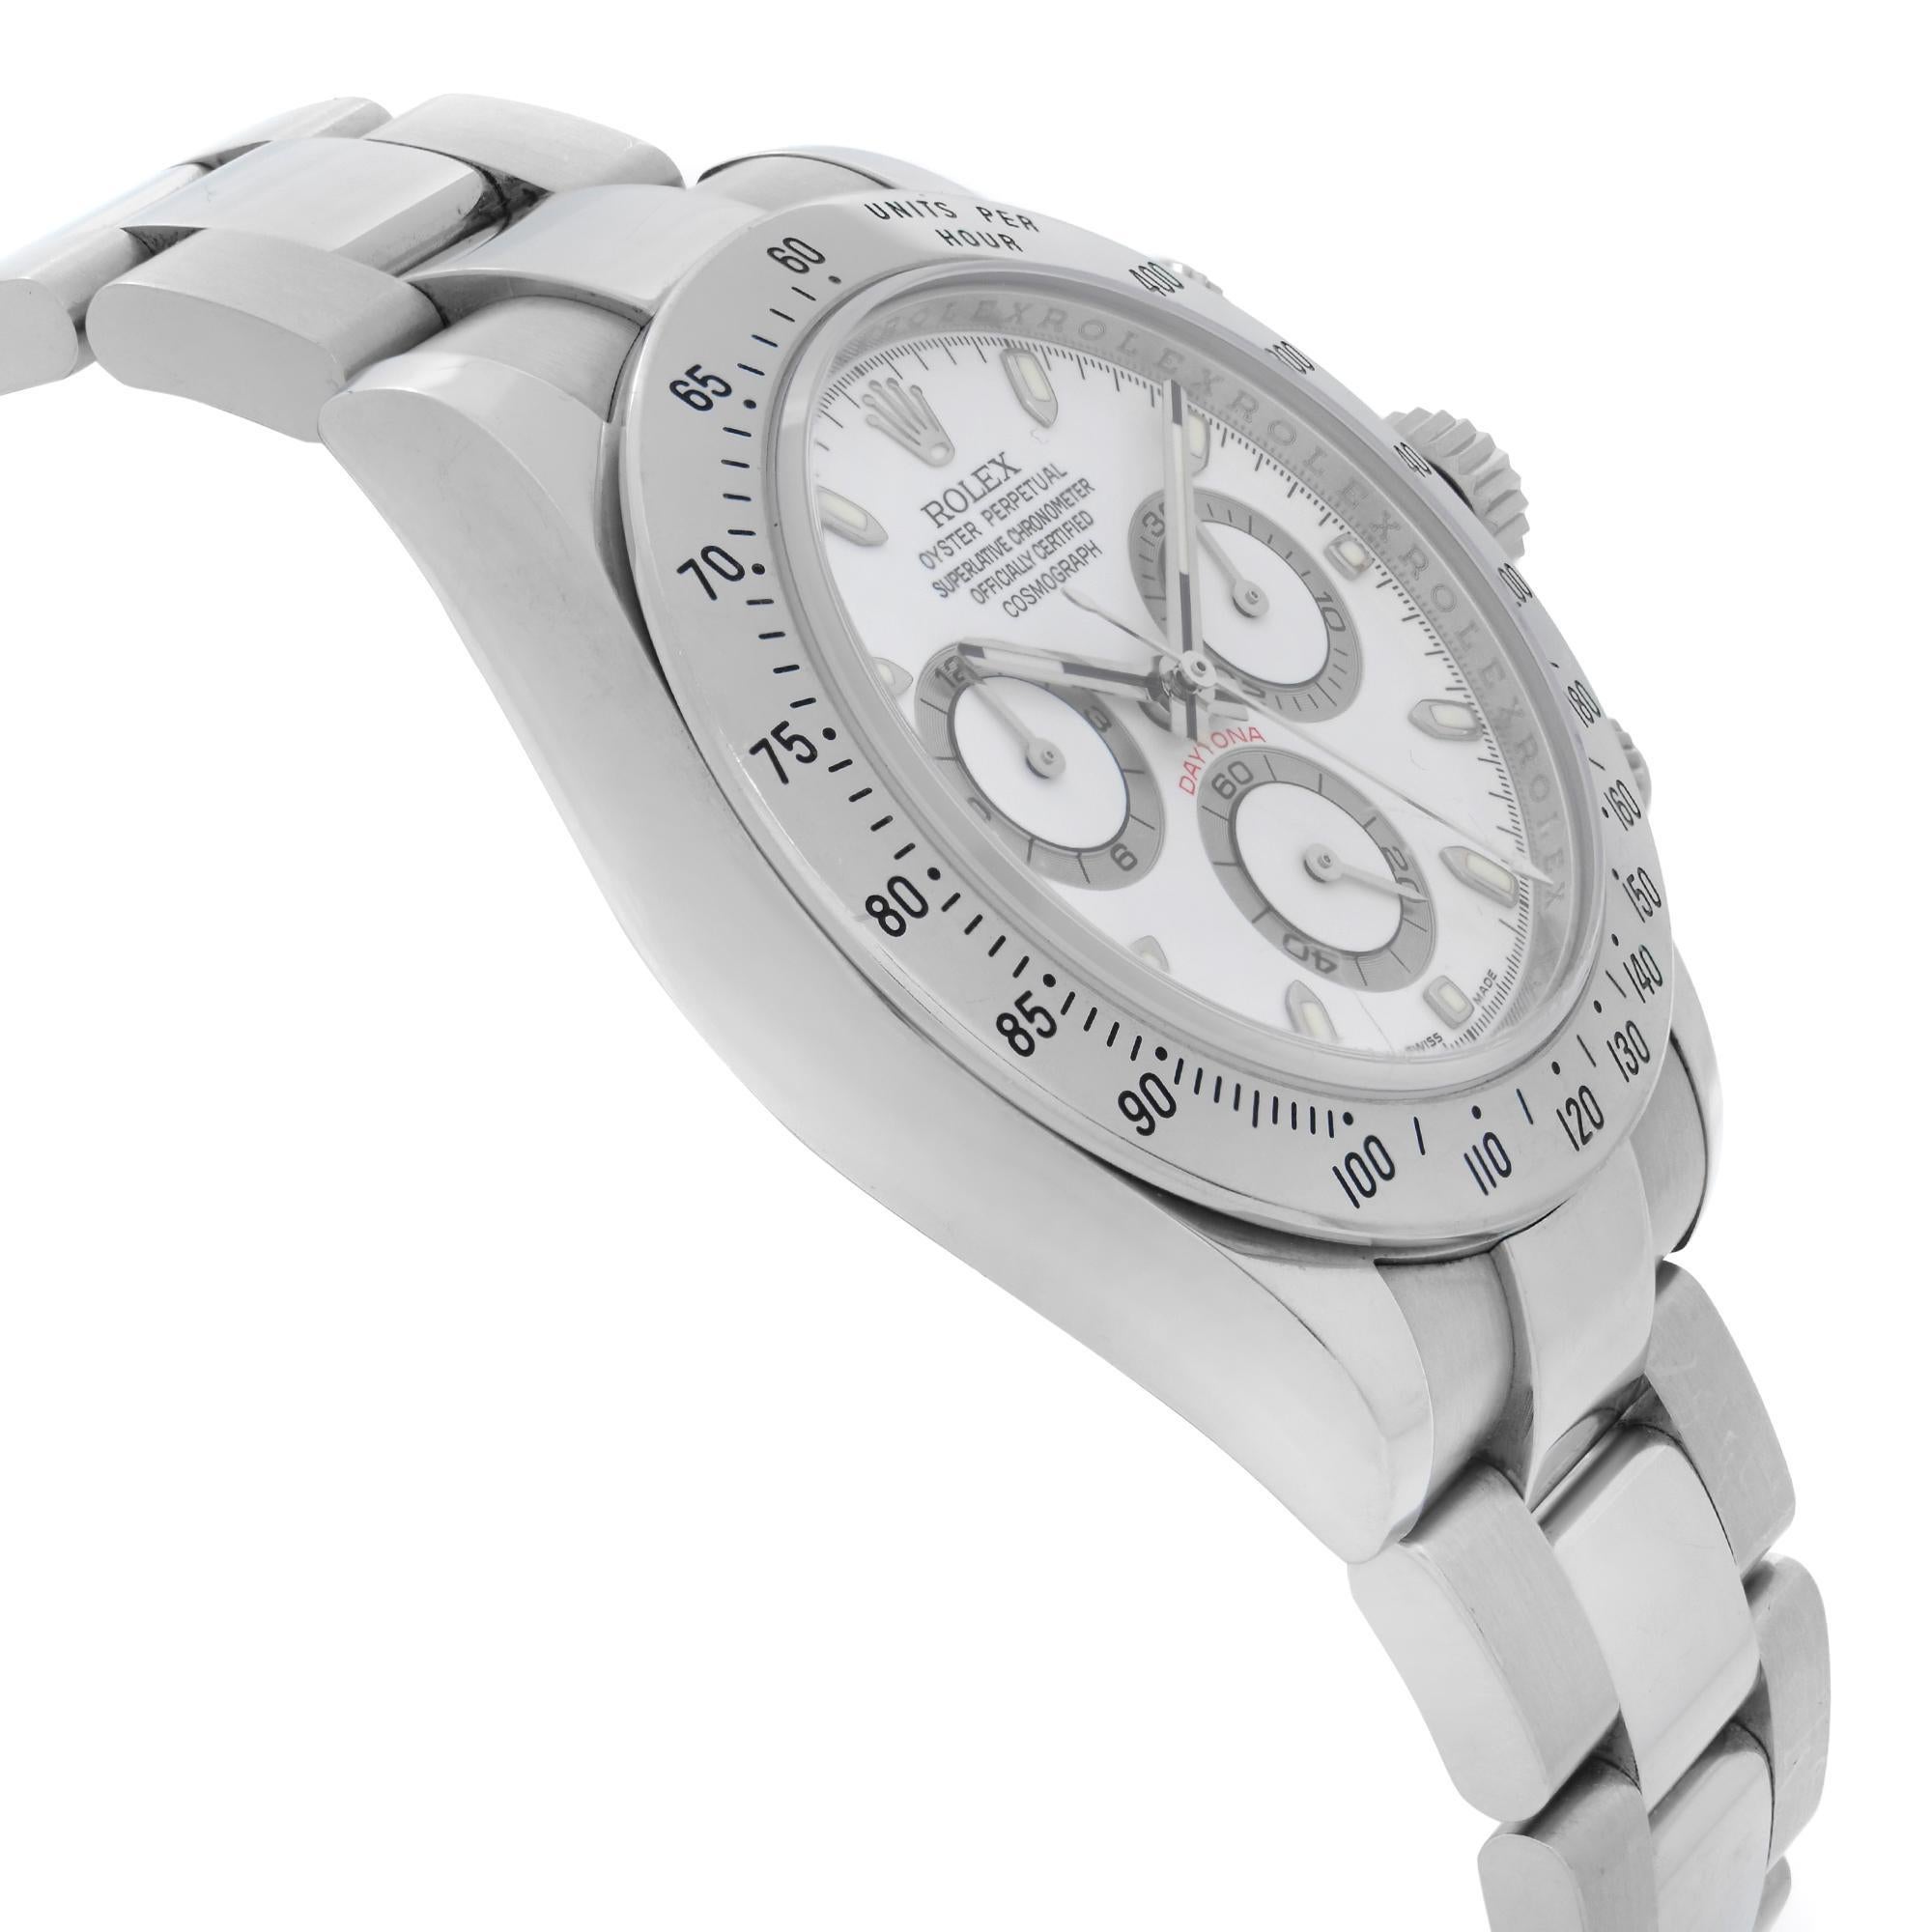 relogio rolex oyster perpetual superlative chronometer officially certified cosmograph